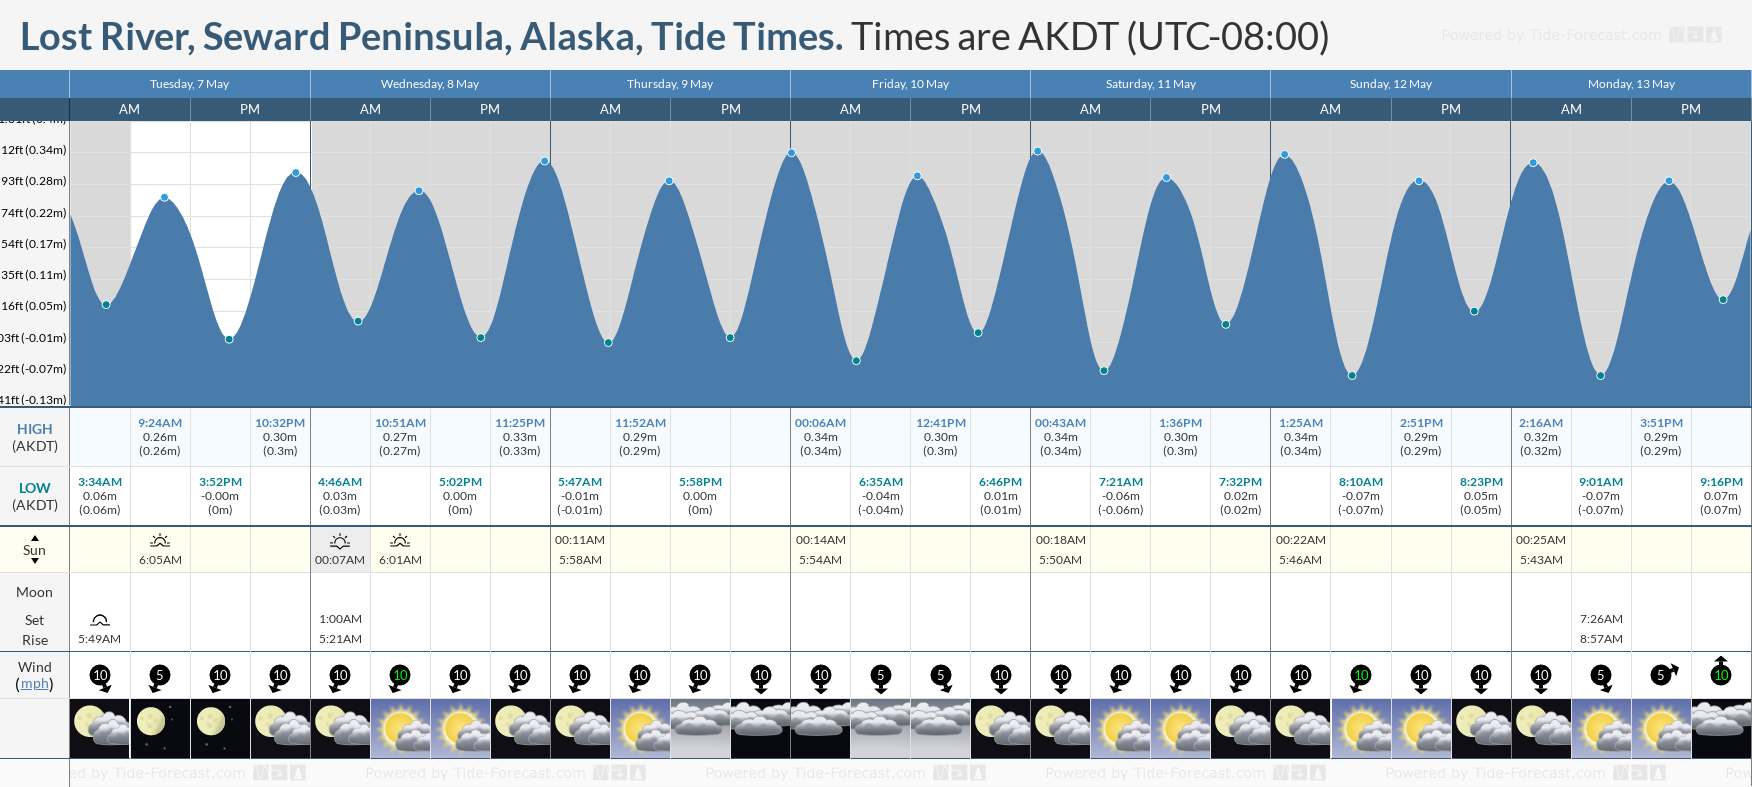 Lost River, Seward Peninsula, Alaska Tide Chart including high and low tide tide times for the next 7 days